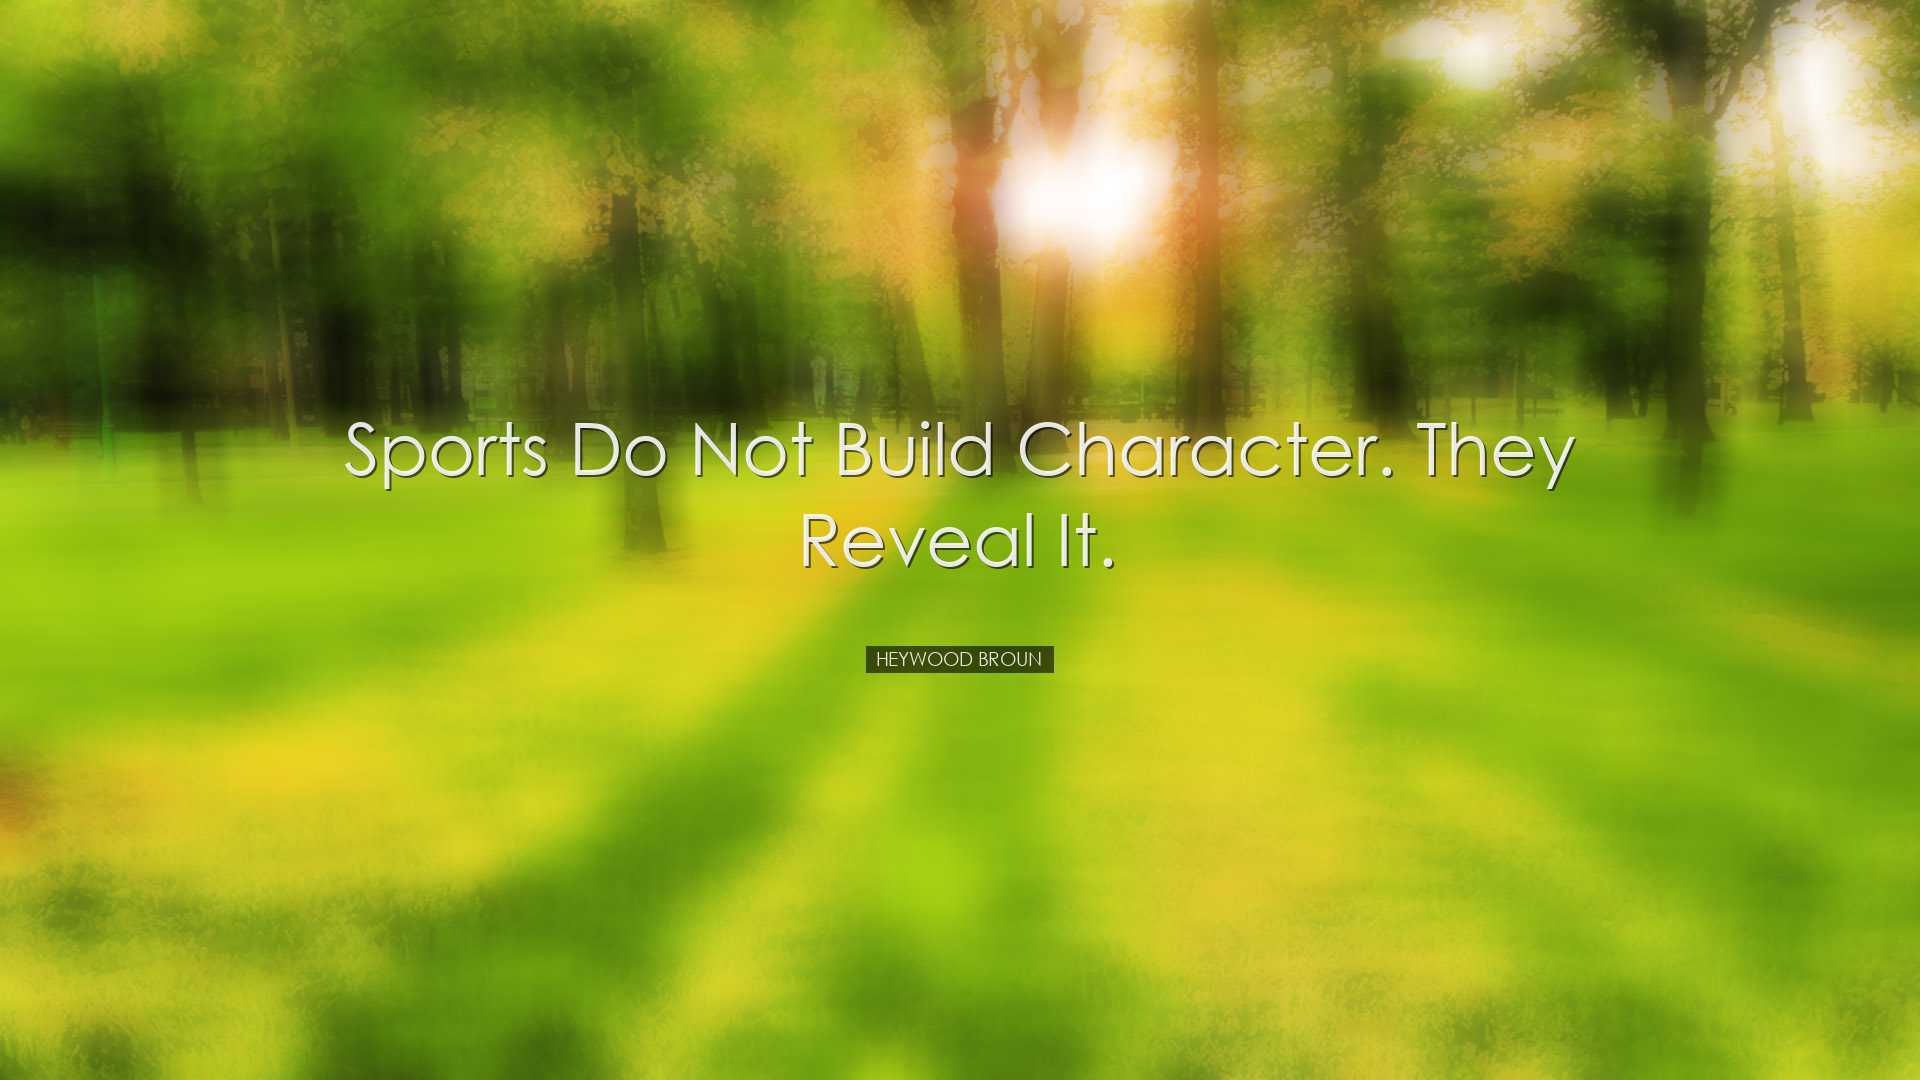 Sports do not build character. They reveal it. - Heywood Broun